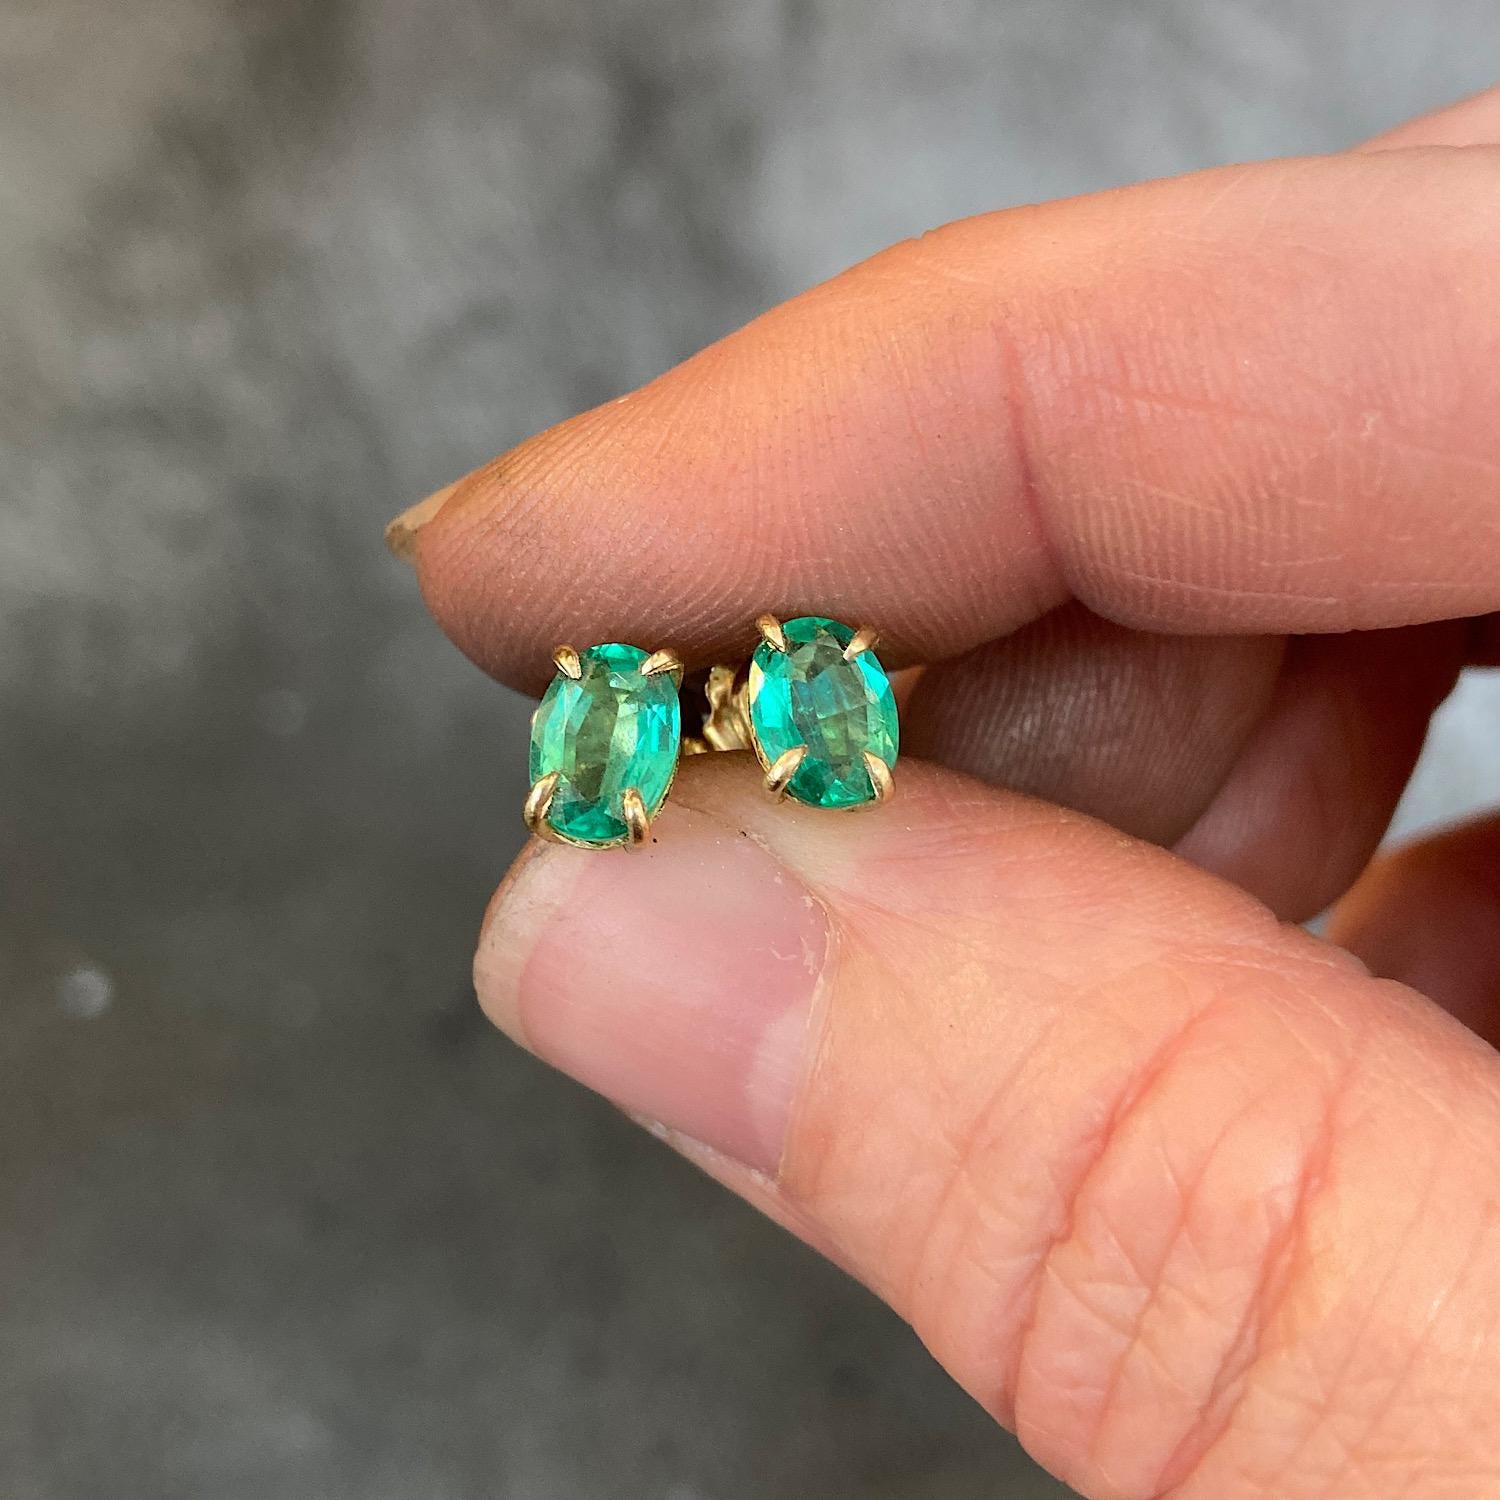 One of a Kind 18K Yellow Gold Claw Set asymmetrical Stud Earrings by Deborah Murdoch is from the new Empress Collection featuring two oval Green Emerald Stones.

Emerald Stones have traditionally been associated with attracting abundance and wealth.